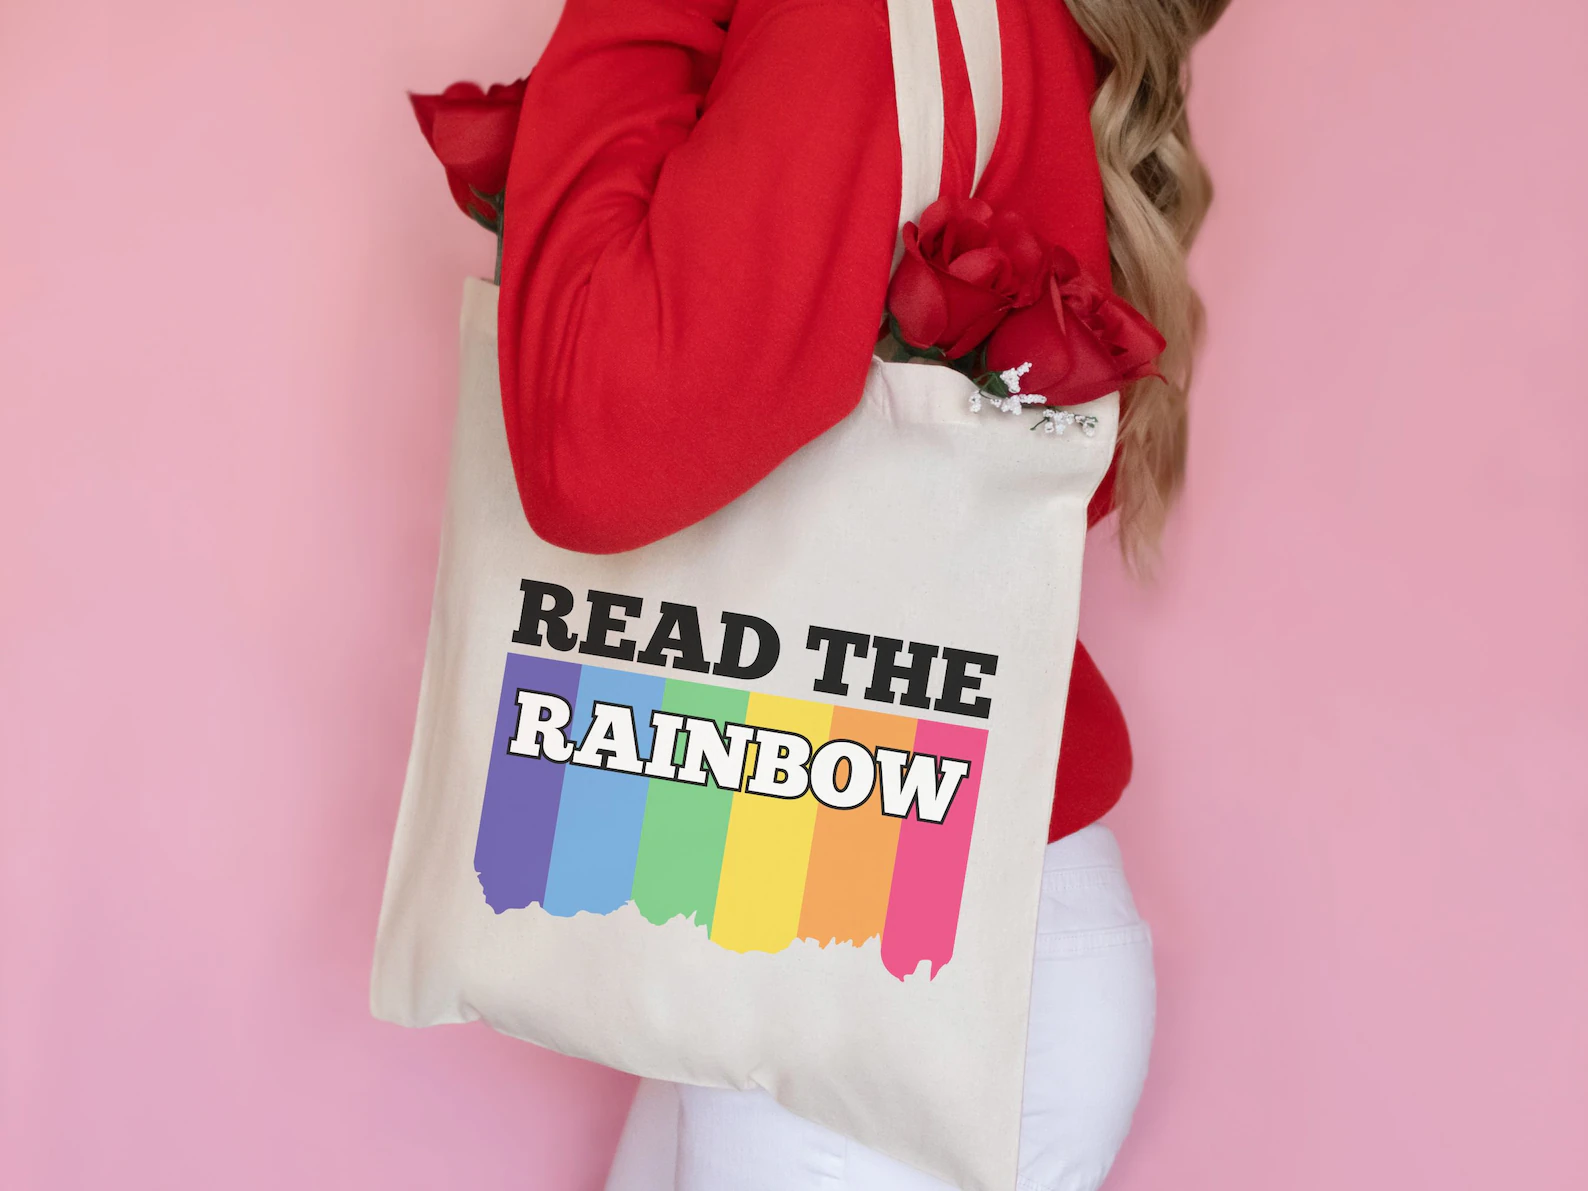 Image of a person holding a canvas tote bag. The bad has a rainbow on it with the words "read the rainbow."